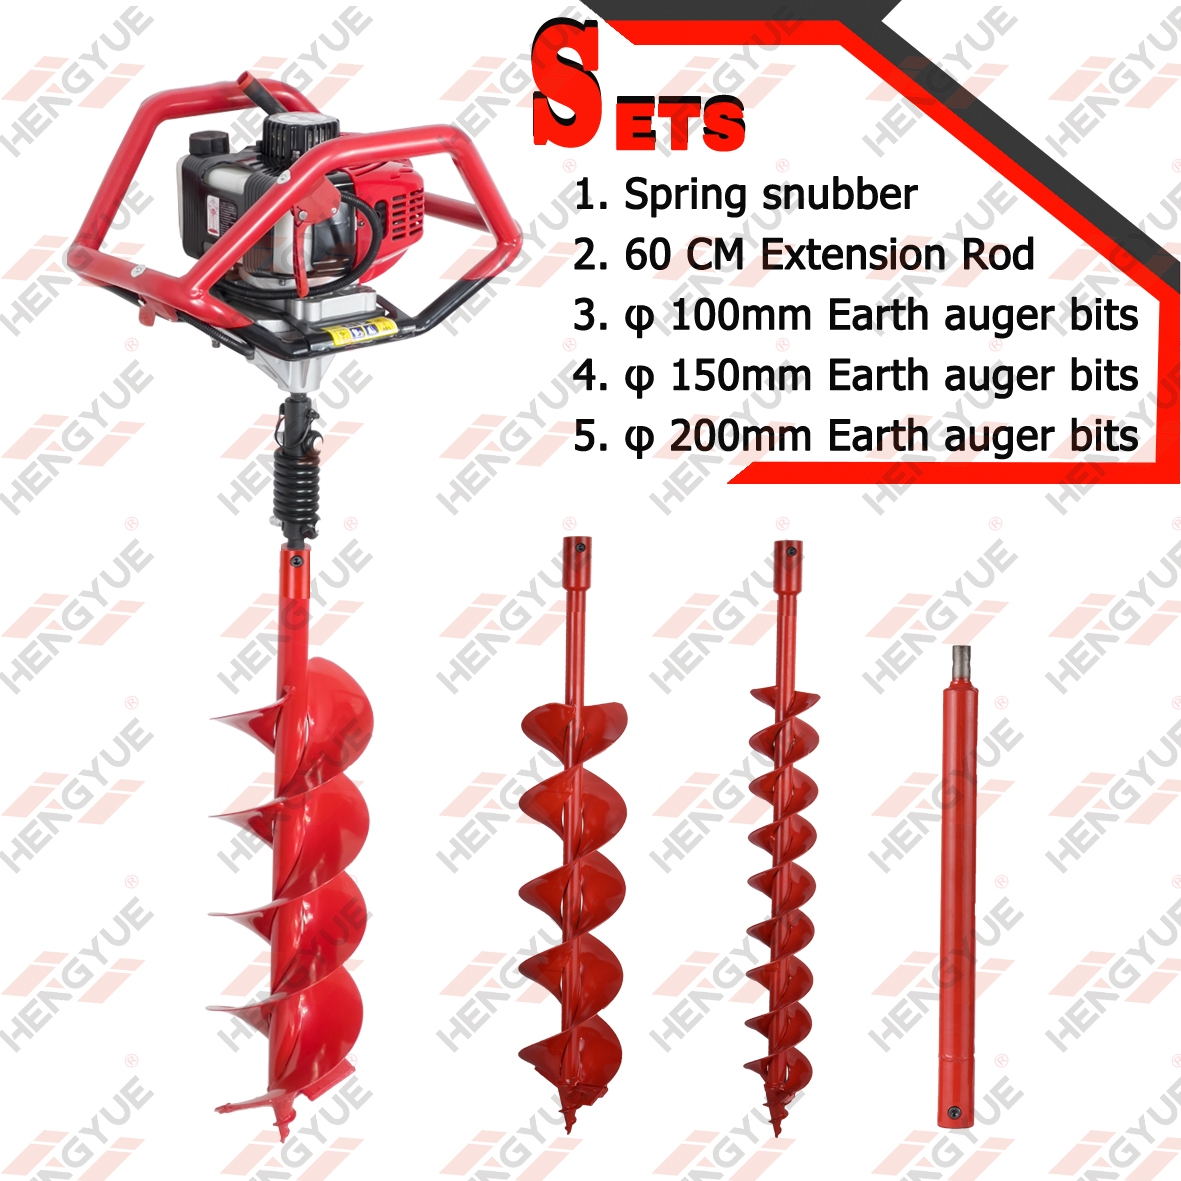 58cc 1 or 2 man operate new desing earth auger 